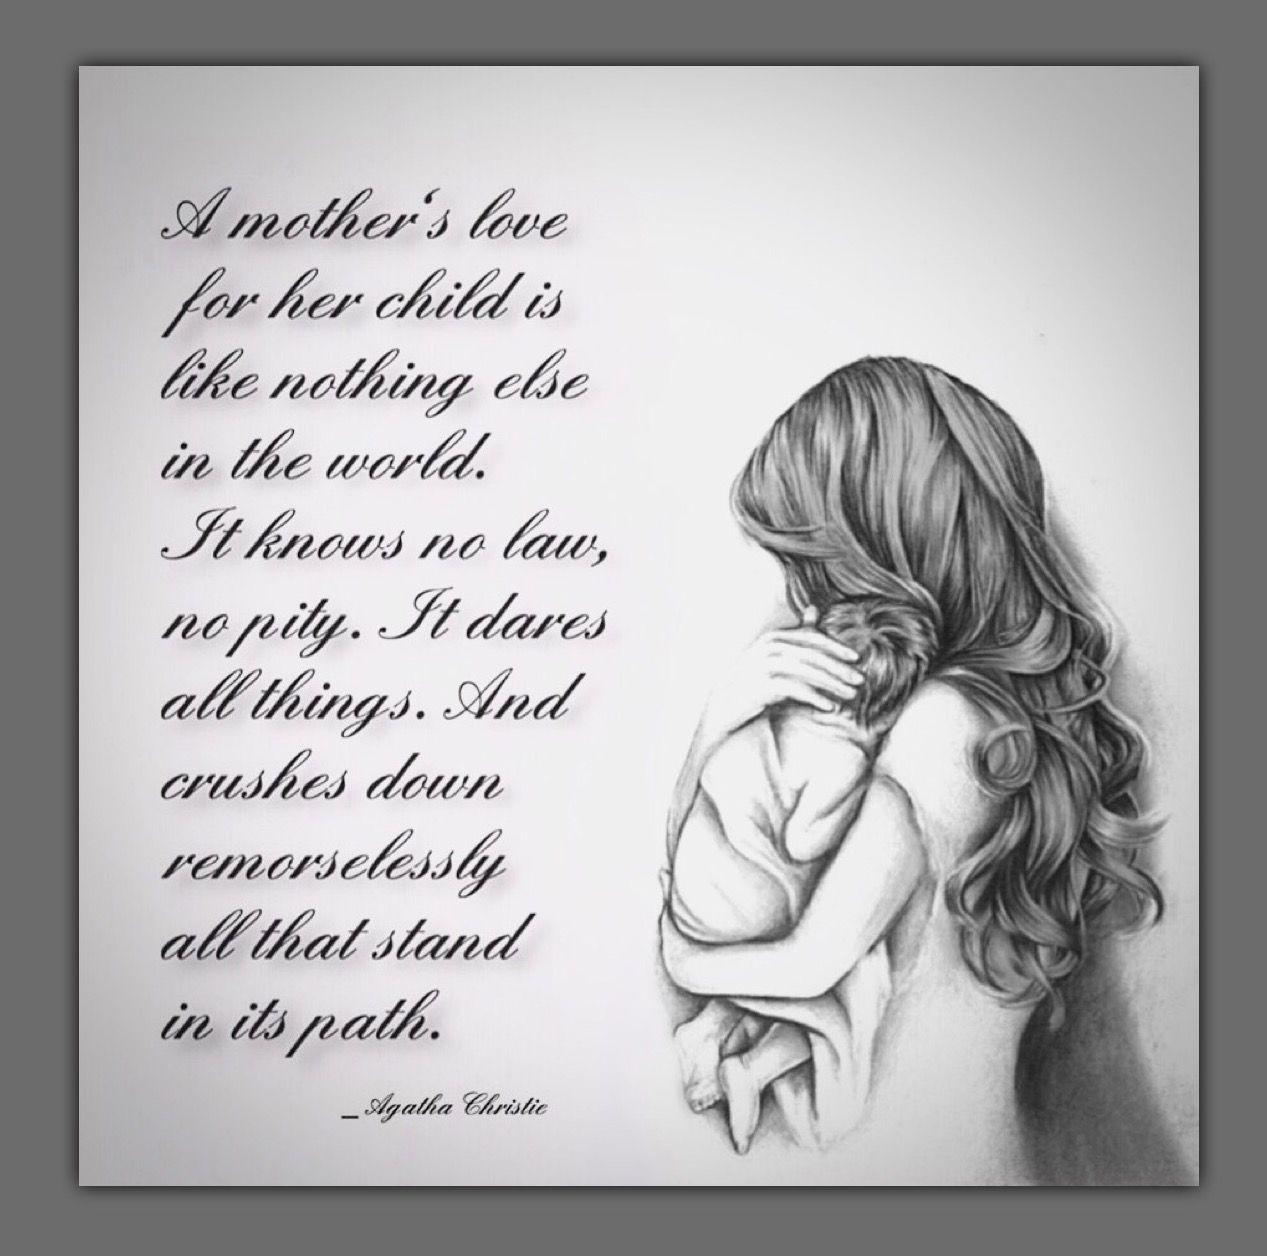 Quotes About A Mother'S Love For Her Daughter
 A mother s love for her child is like nothing else in the